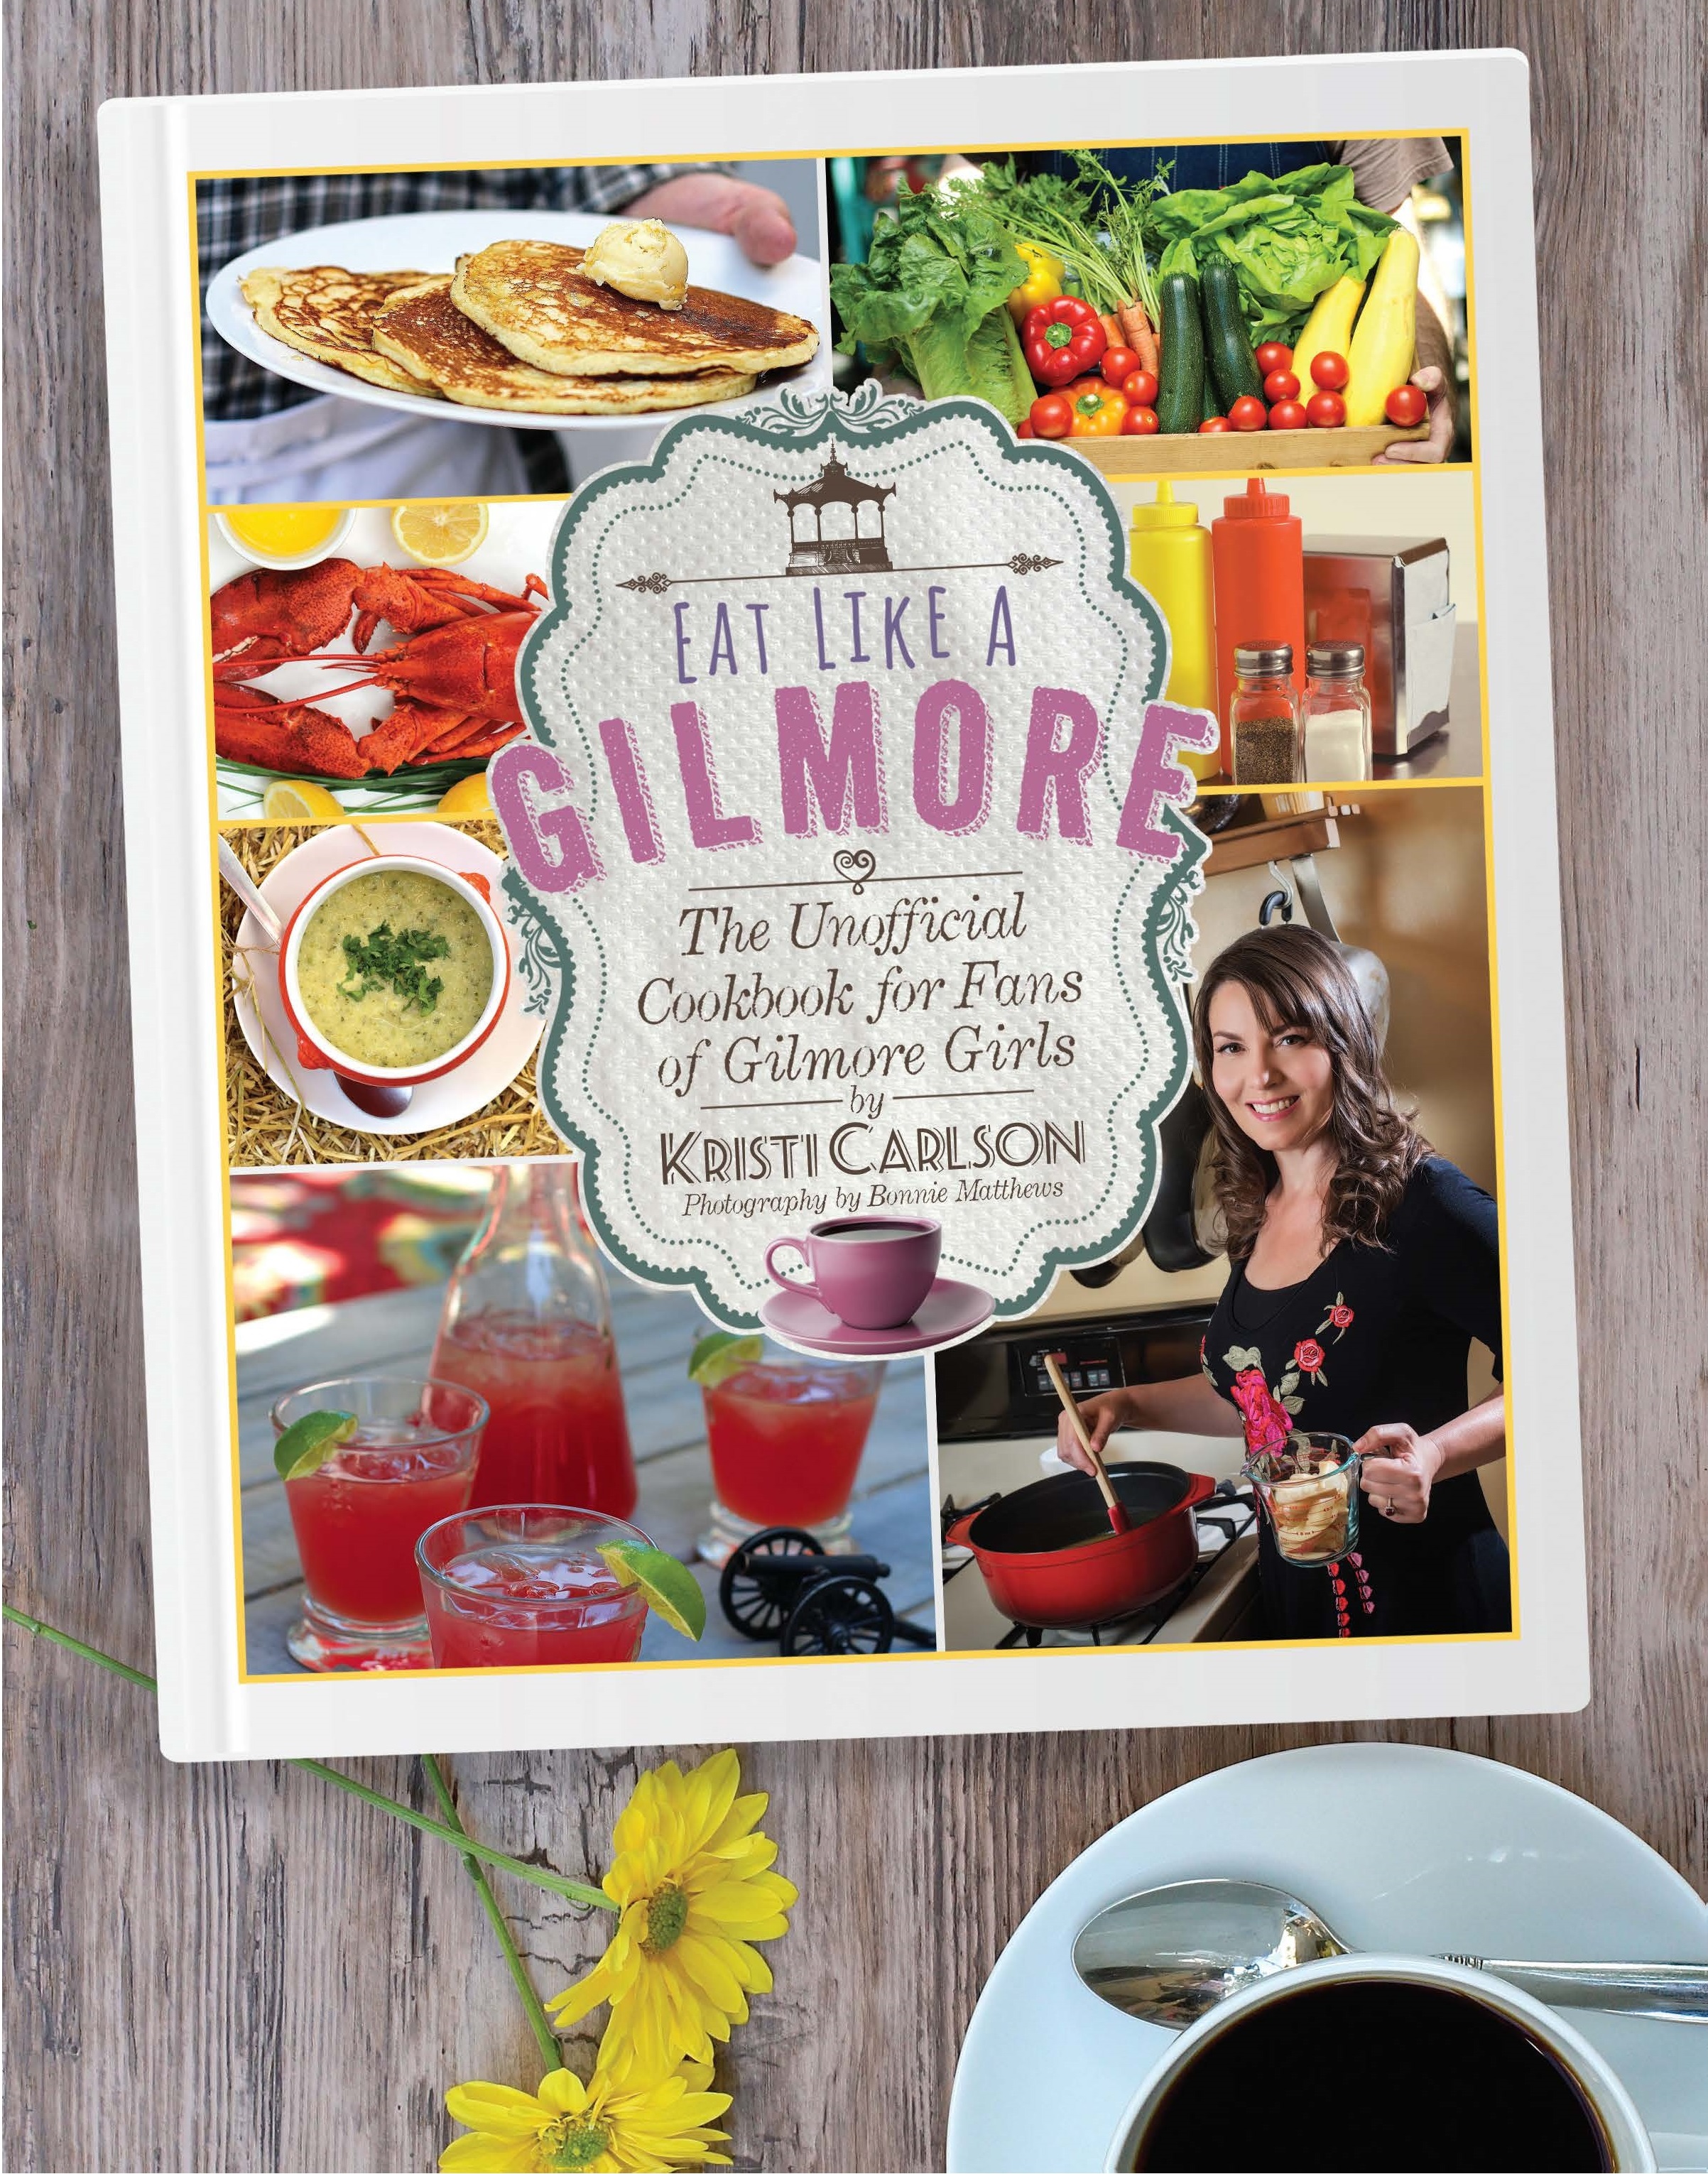 "Eat Like A Gilmore" - Kristi Carlson's first cookbook